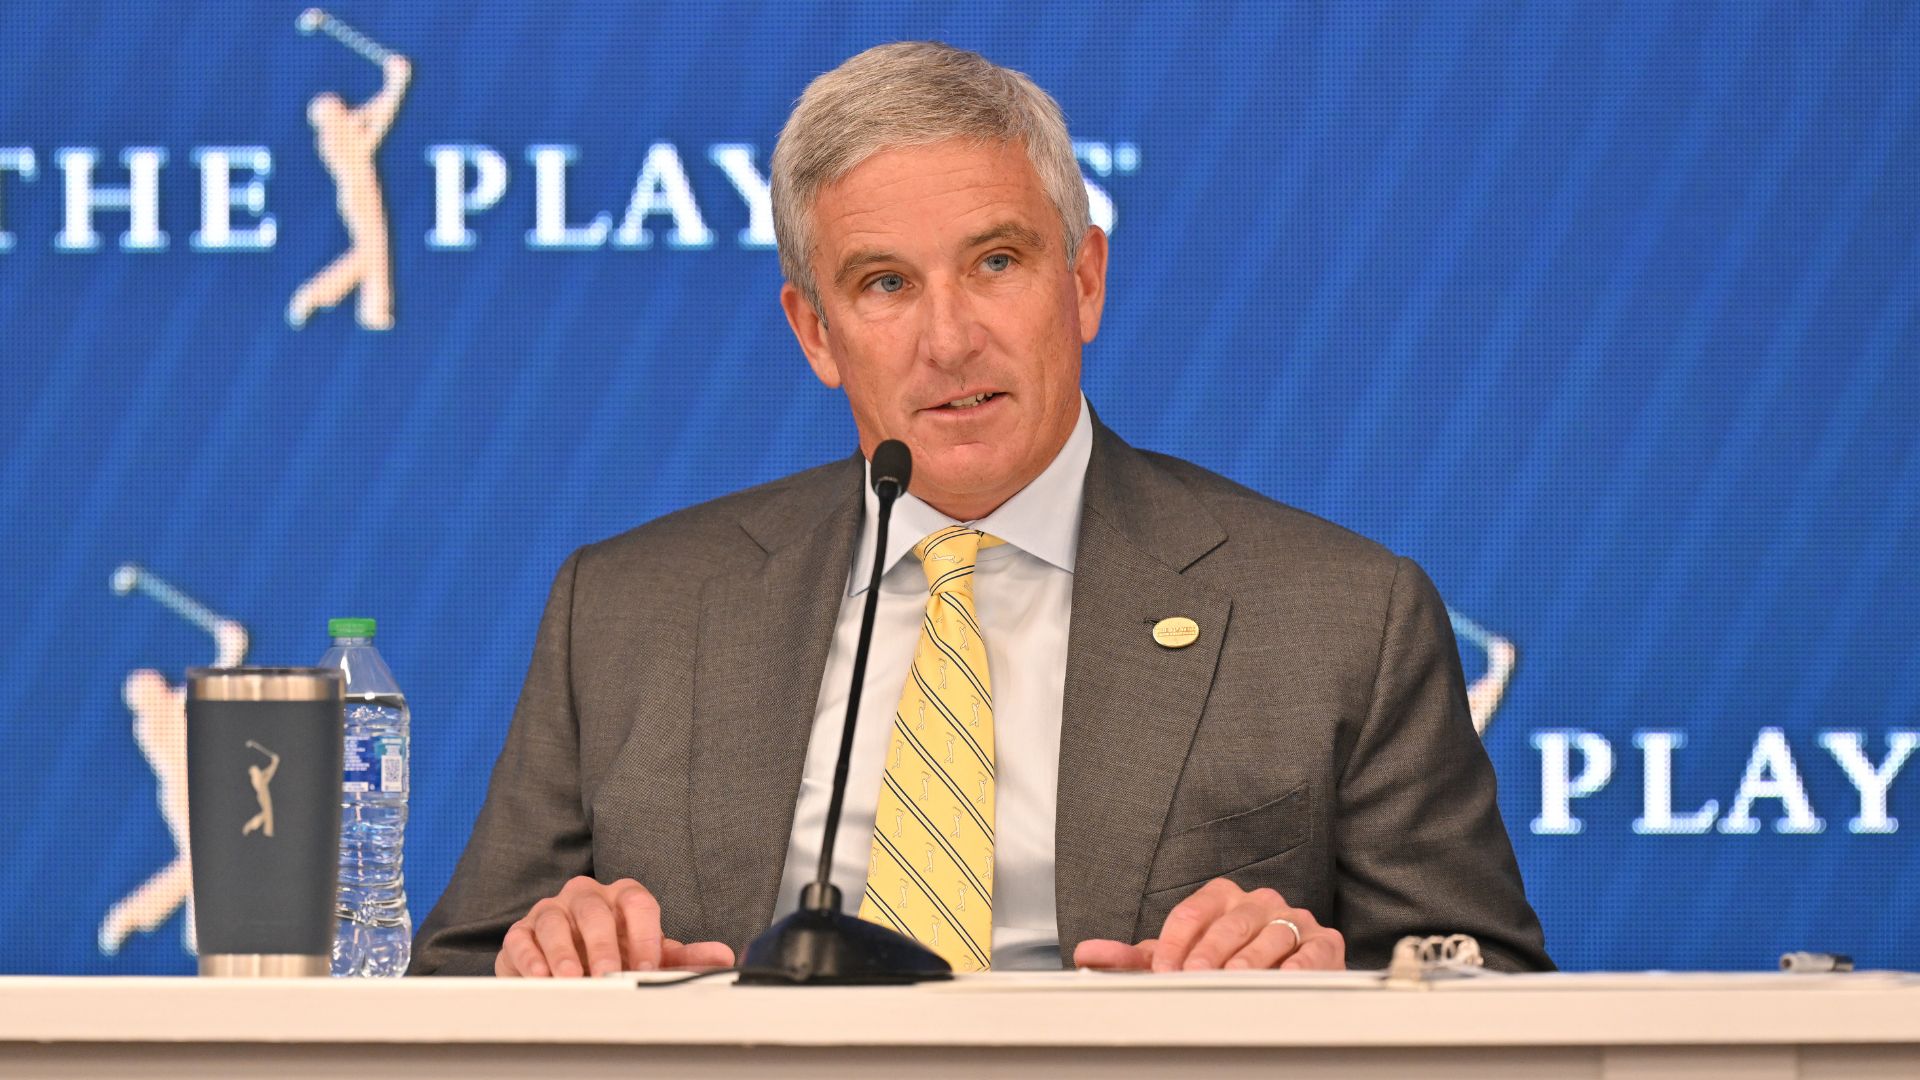 PGA Tour commissioner Jay Monahan to return from absence on July 17